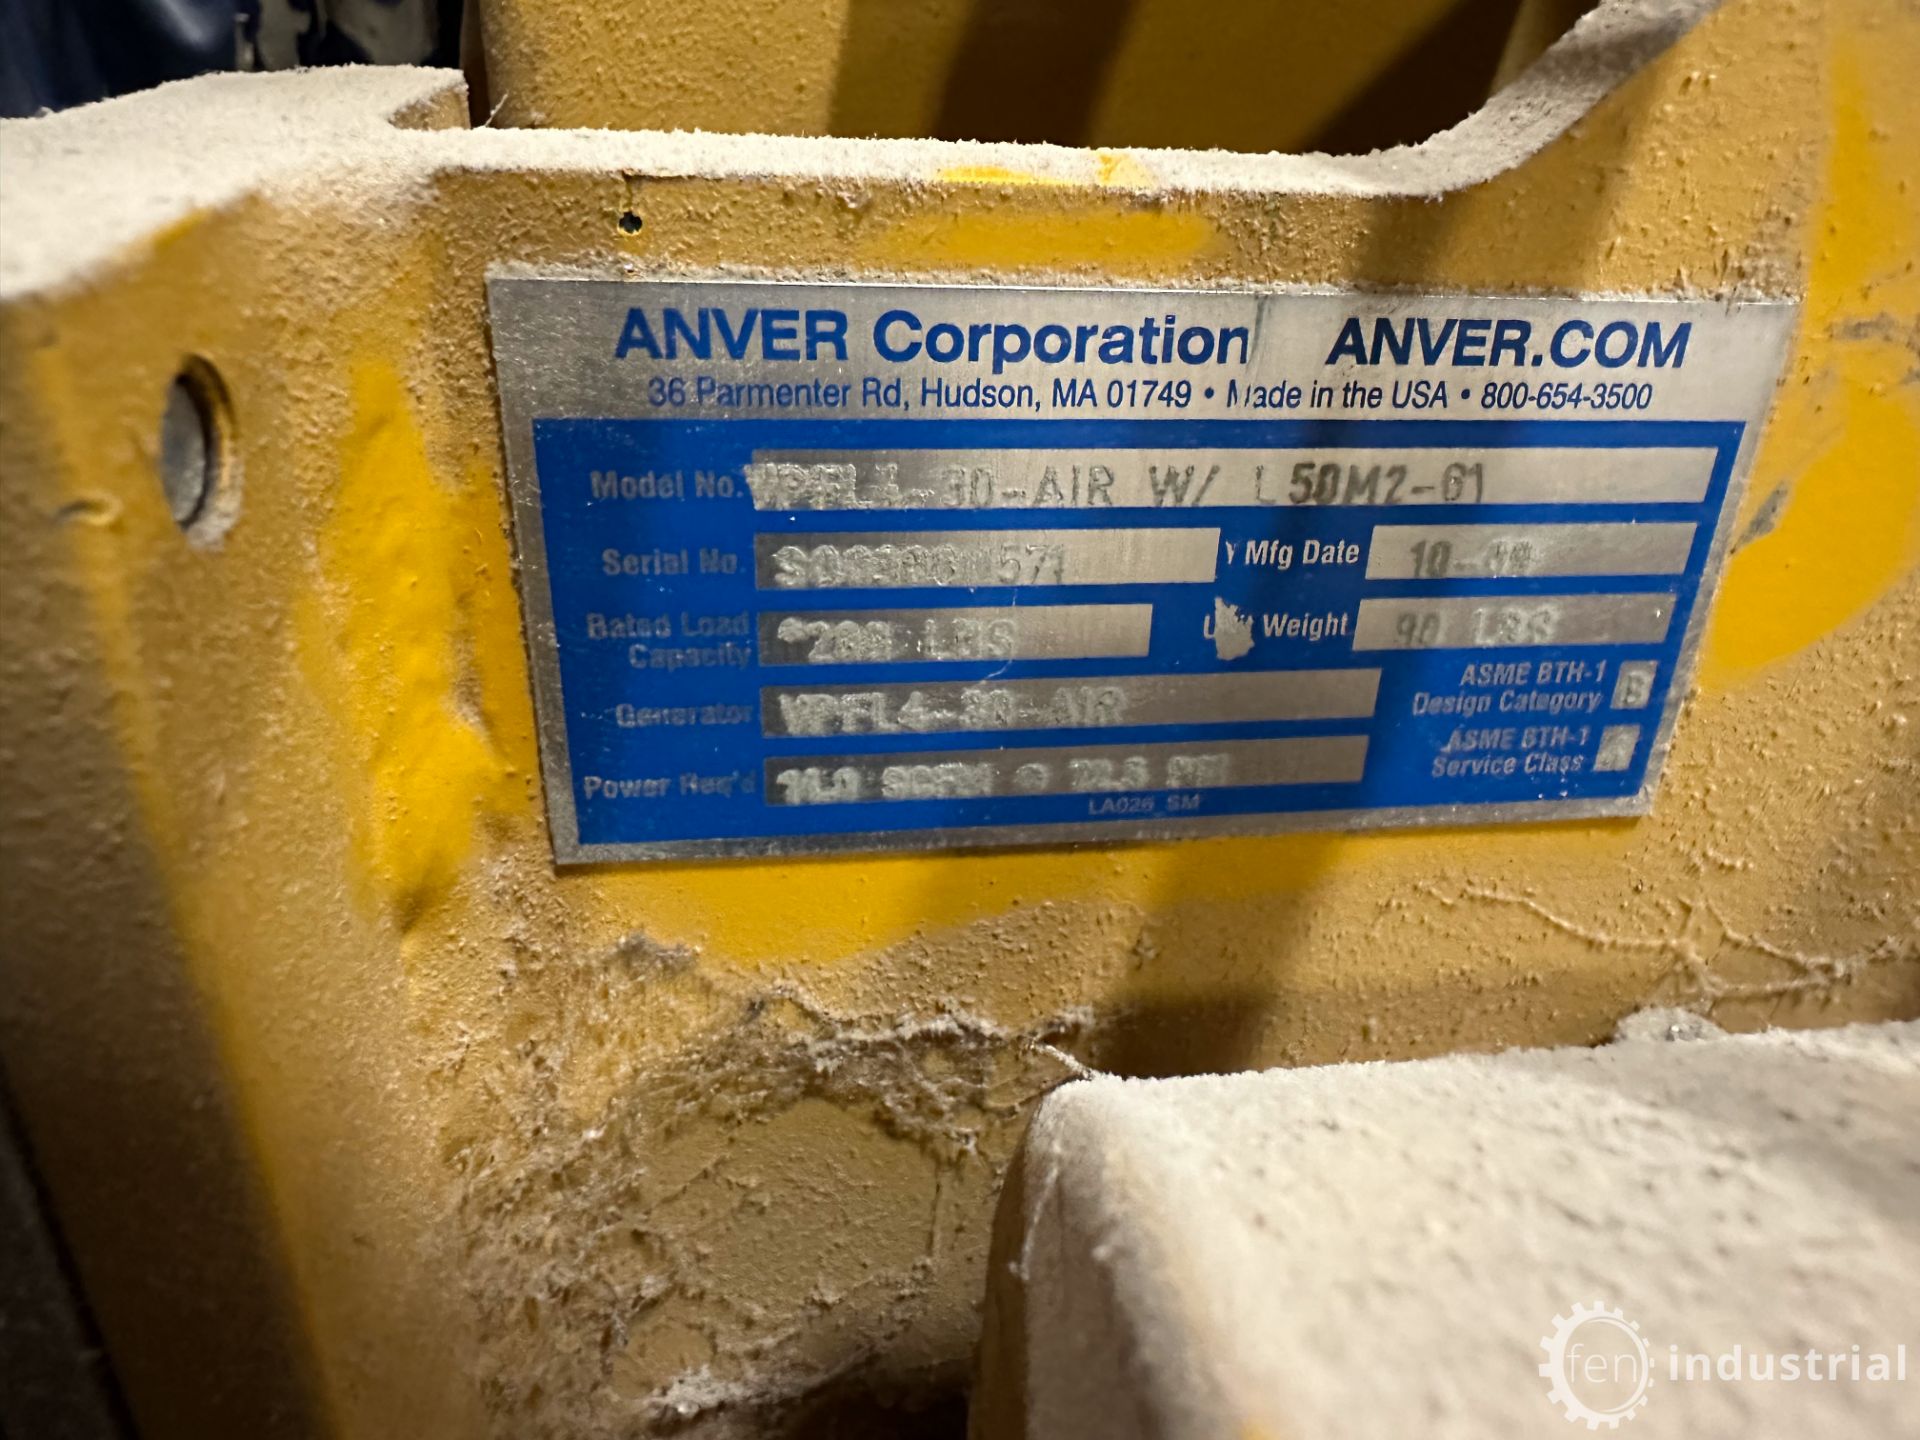 ANVER VPFL4-30-AIR W/ L58M2-66 AIR POWERED LIGHT DUTY VACUUM GENERATOR W/ TWO PAD LIFTING FRAME, 1, - Image 8 of 31